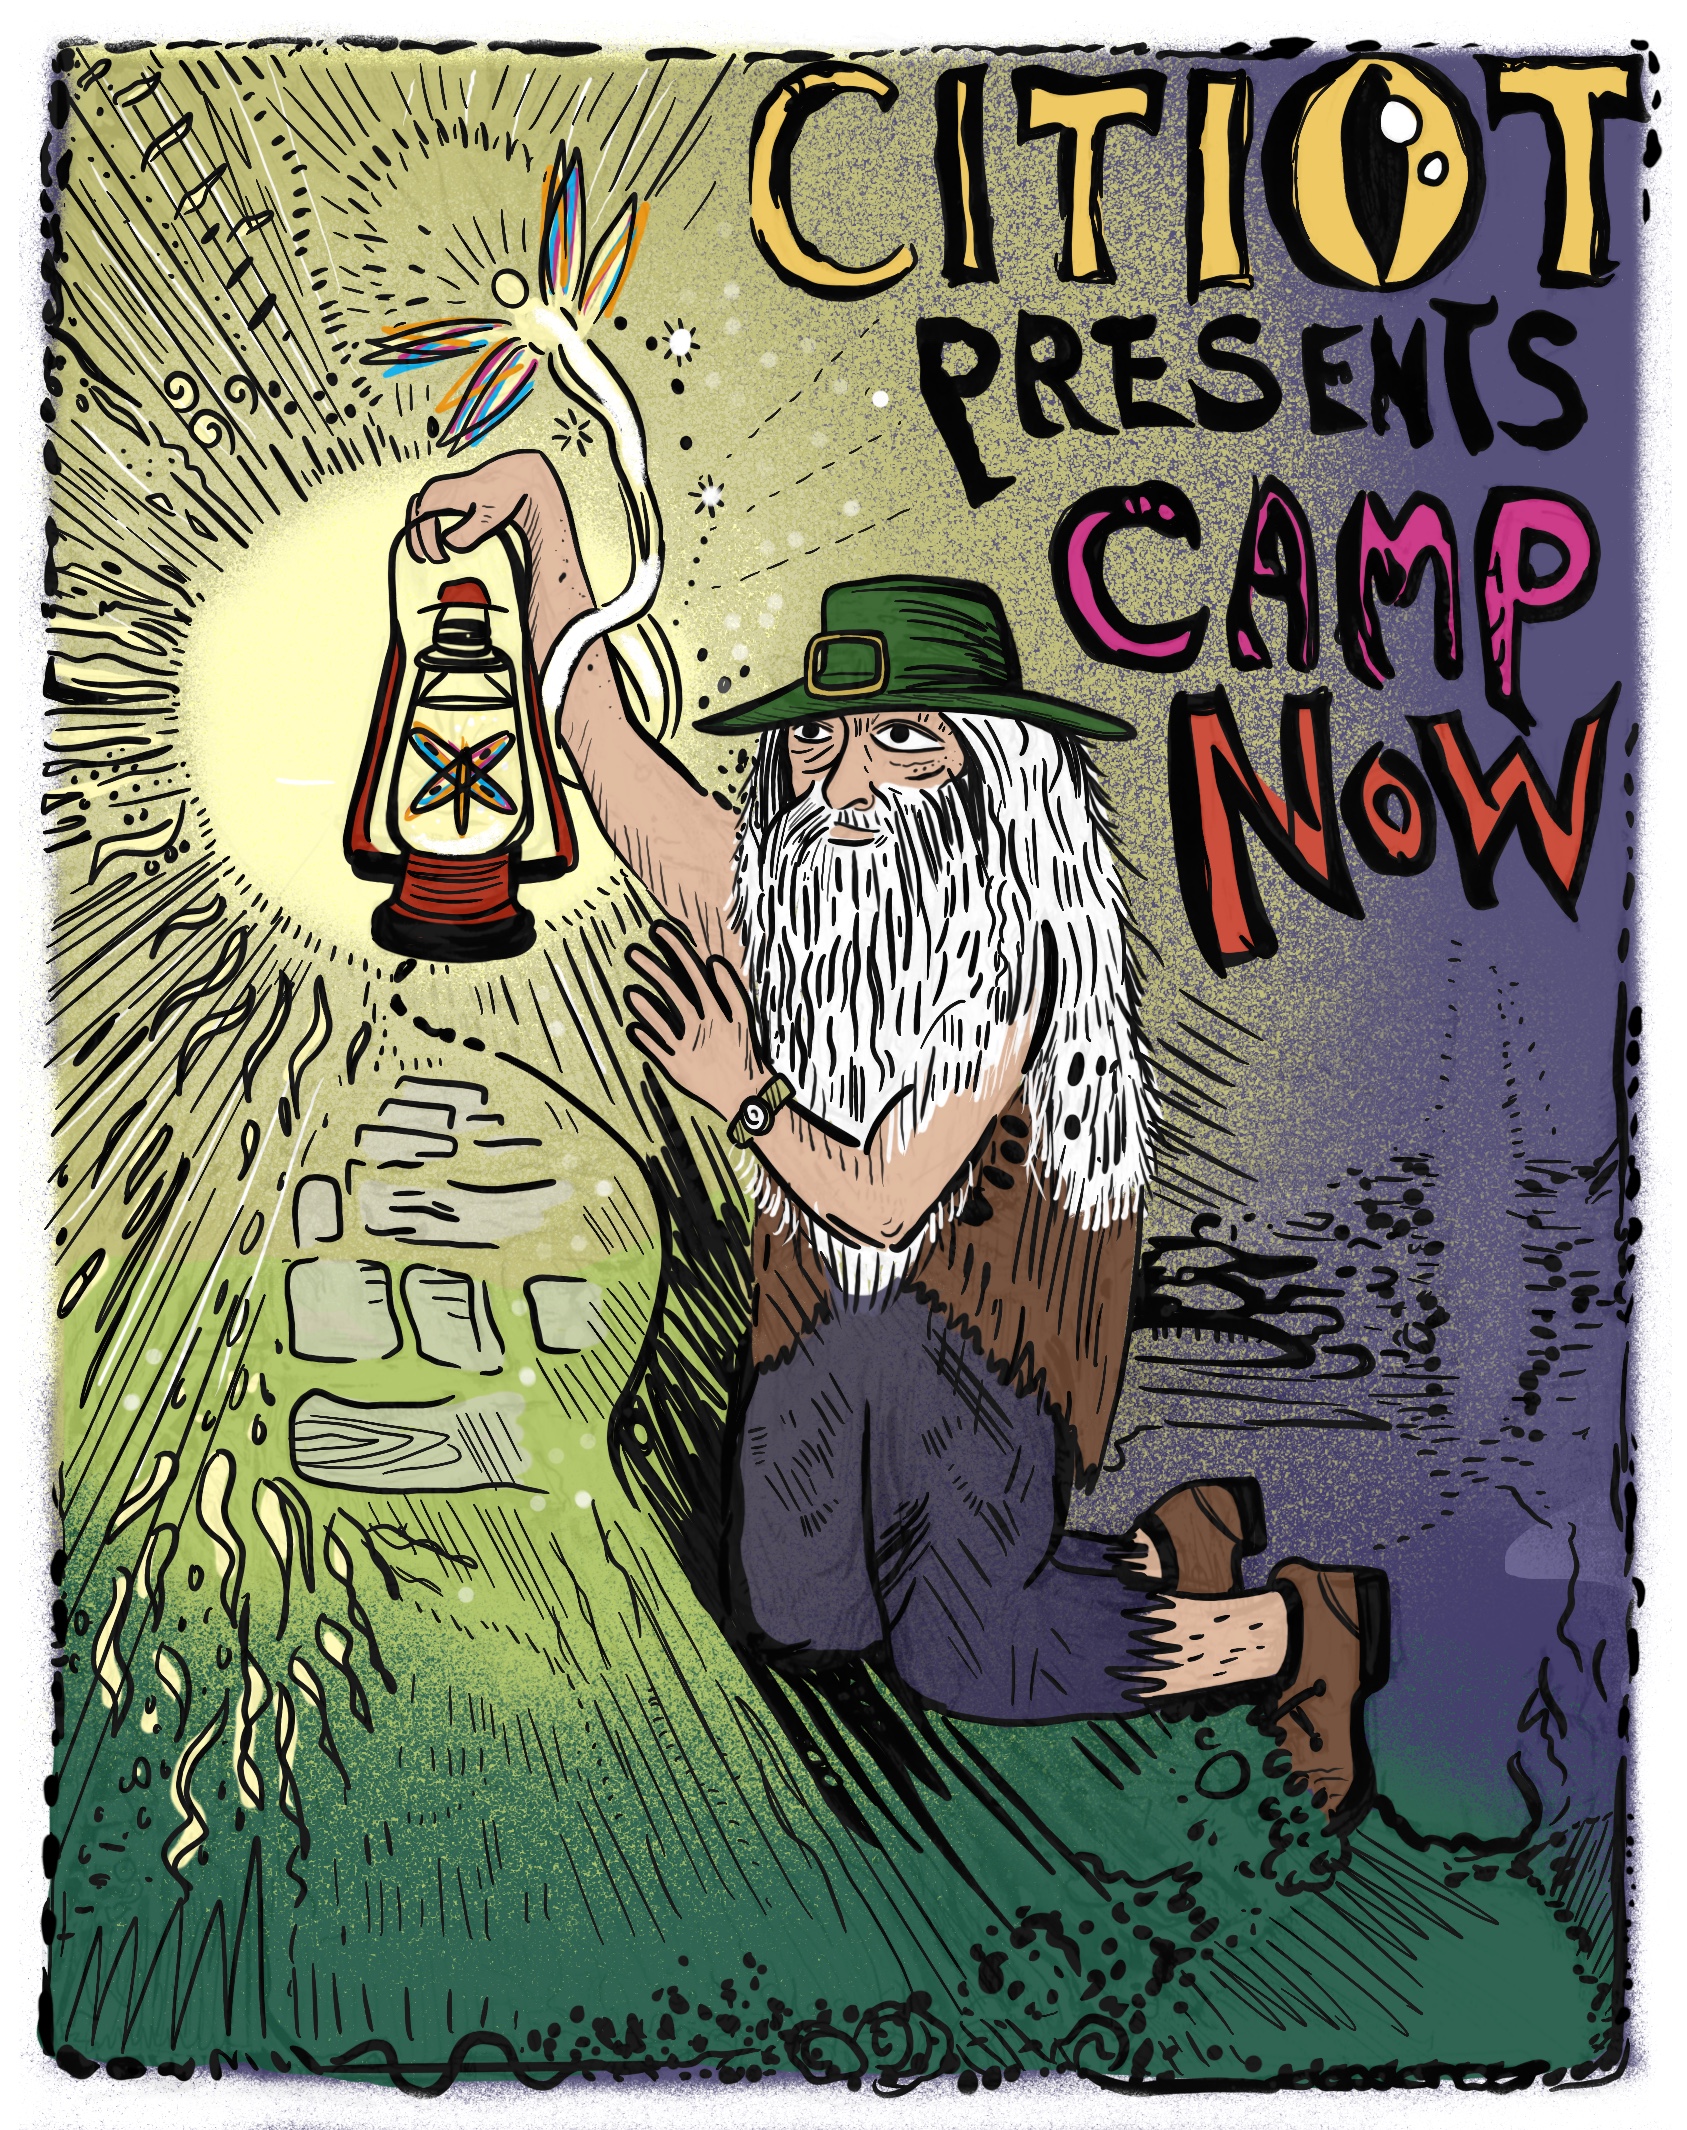 Camp Now X CITIOT - first friday catskill